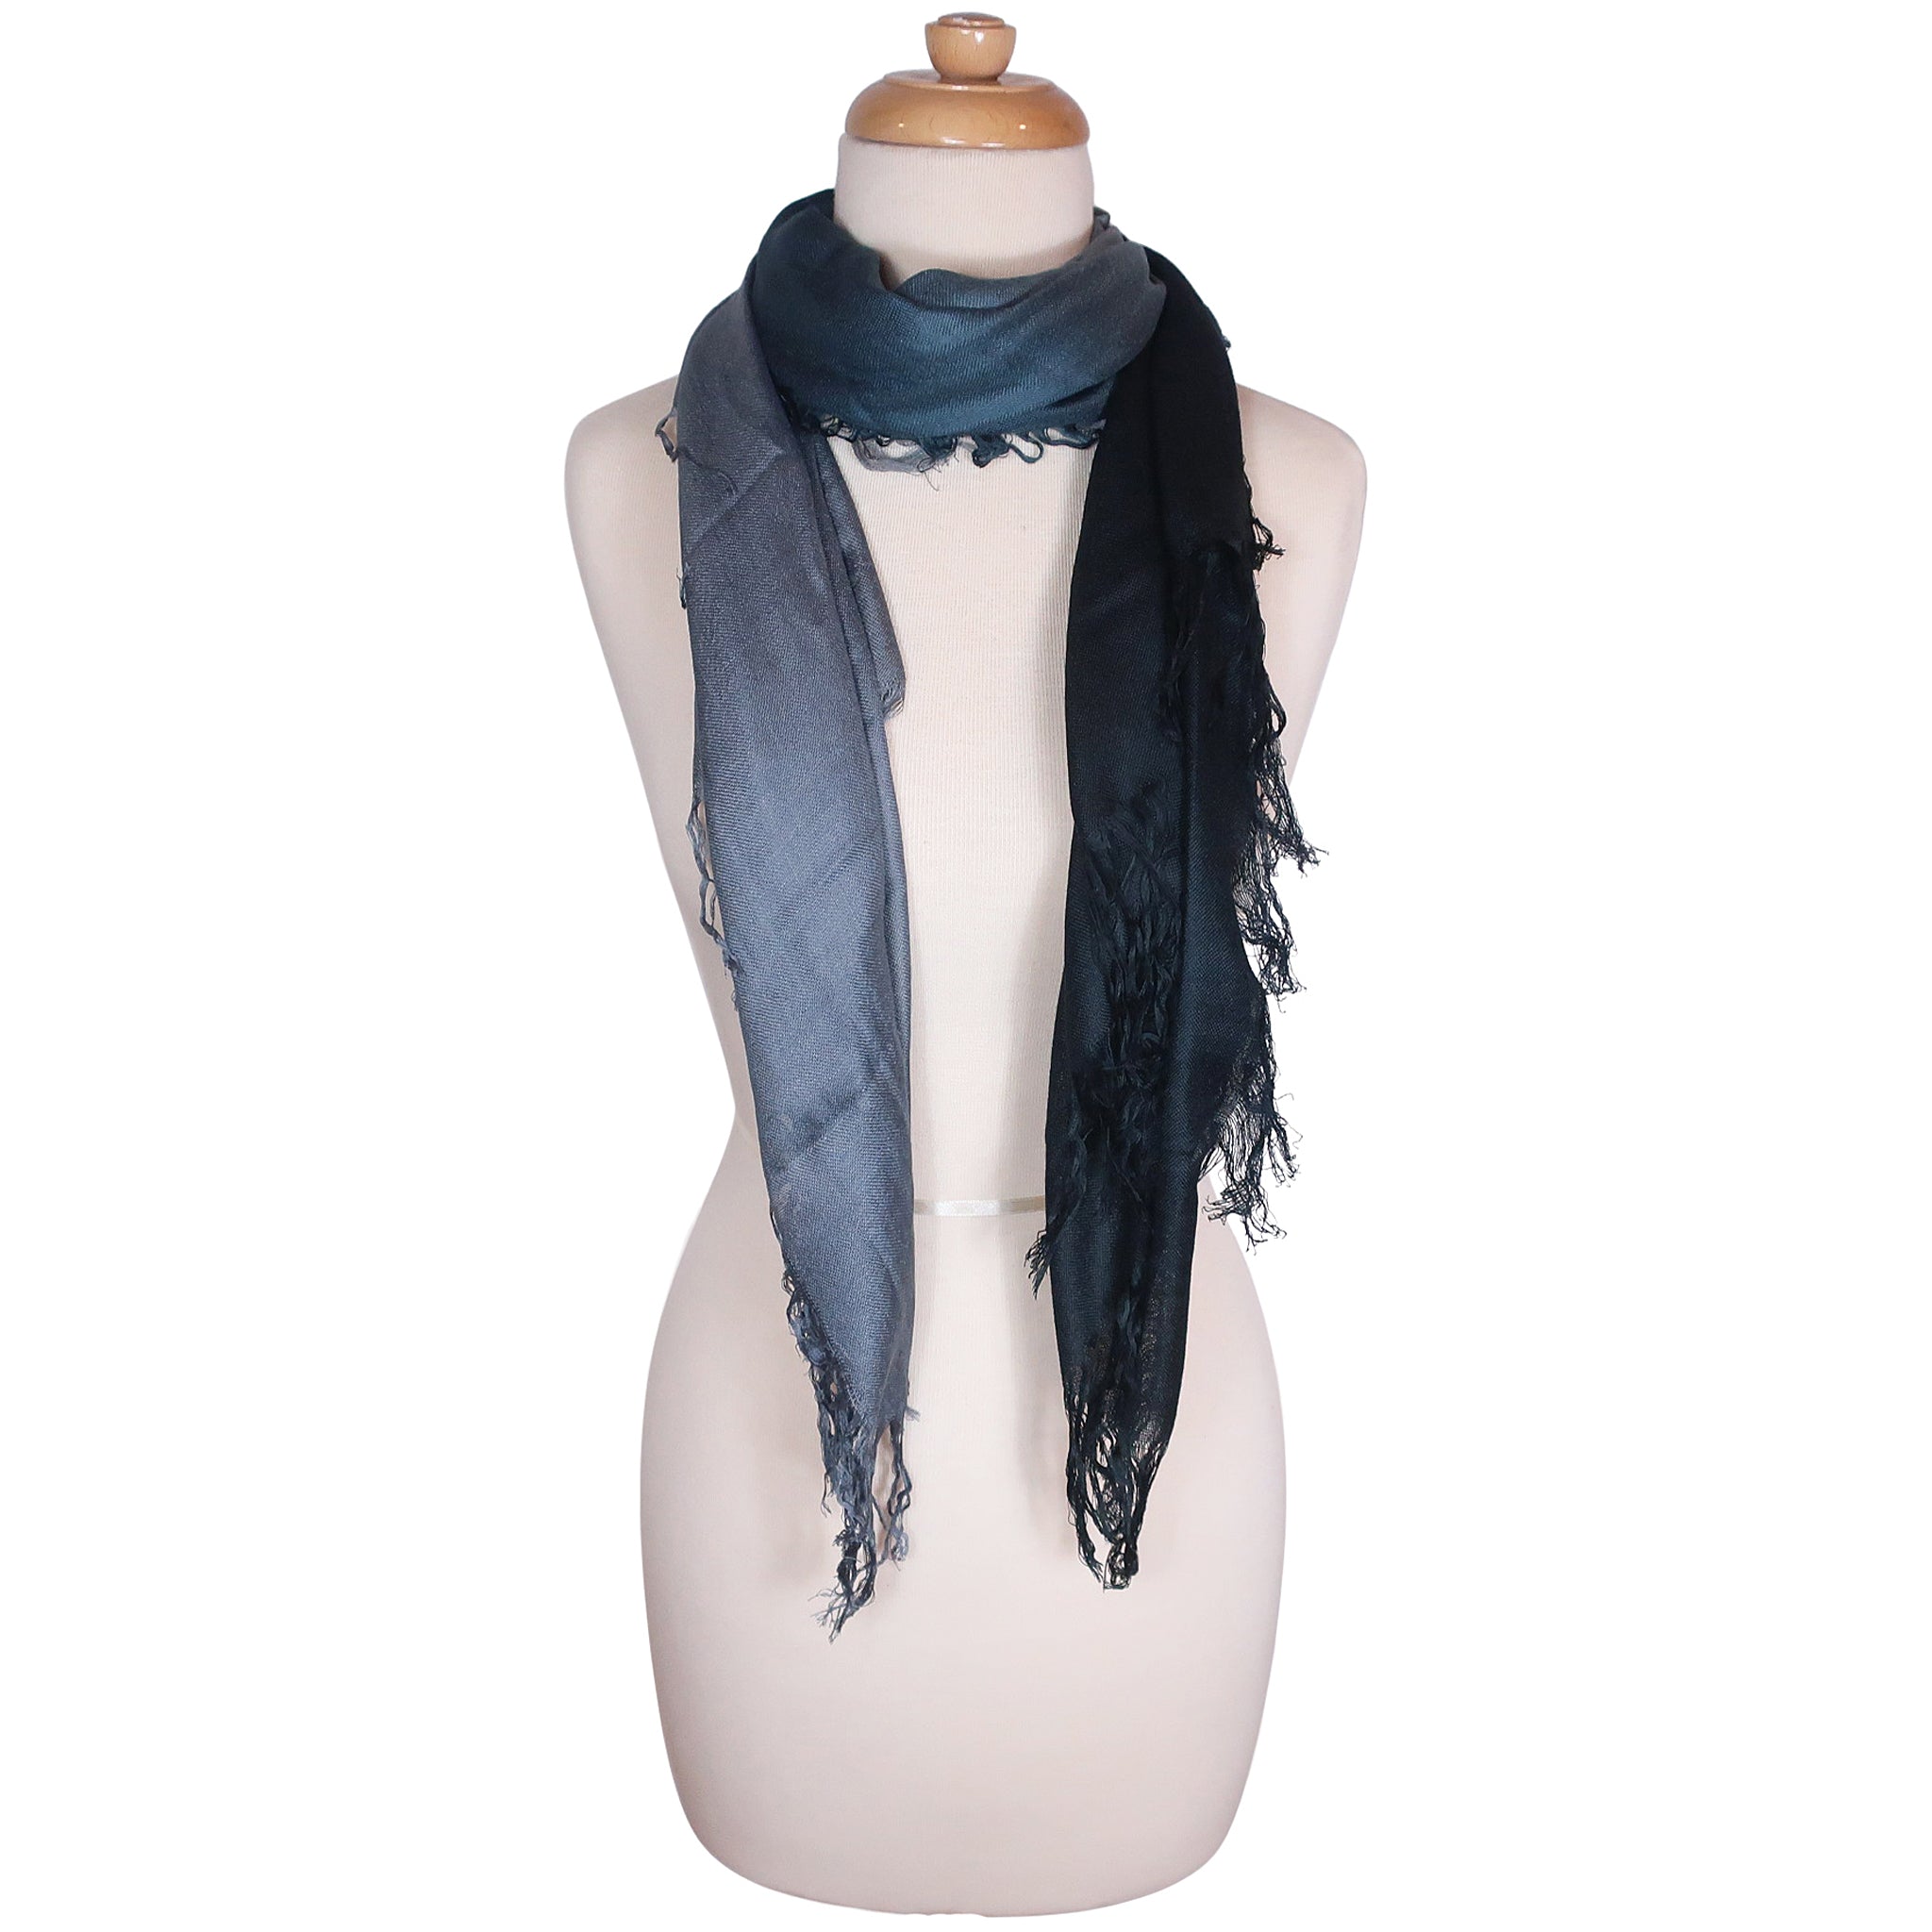 Blue Pacific Tissue Solid Micromodal Cashmere Scarf in Silver and Black 28 x 60